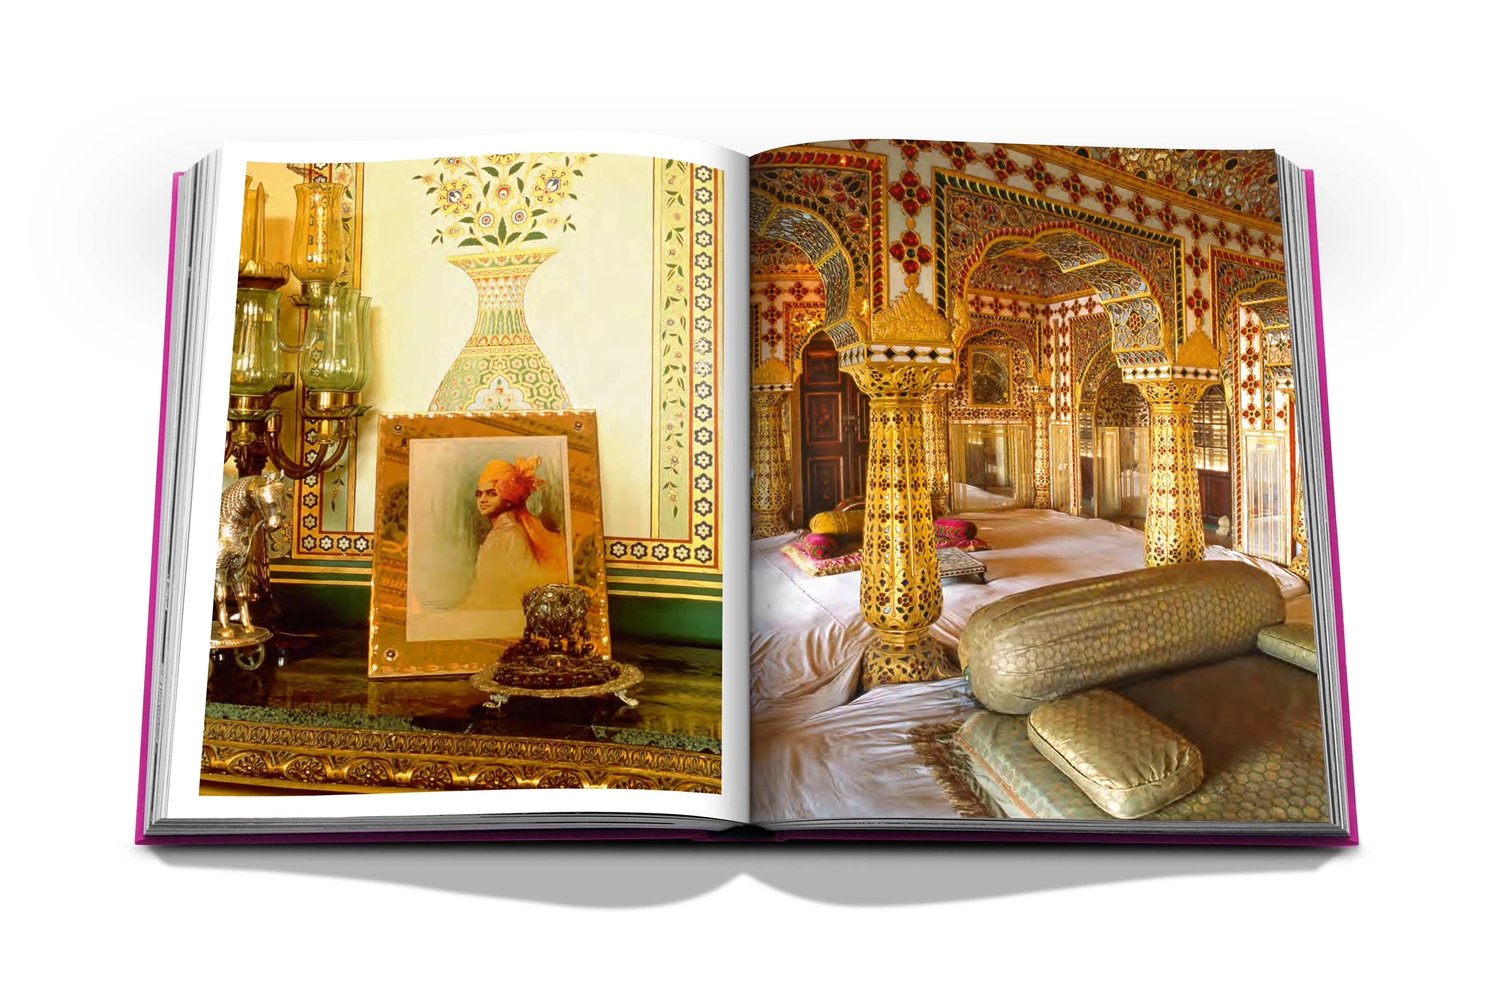 Assouline Louis Vuitton Skin: The Architecture of Luxury (New York Edition)  - Proluca Interiors